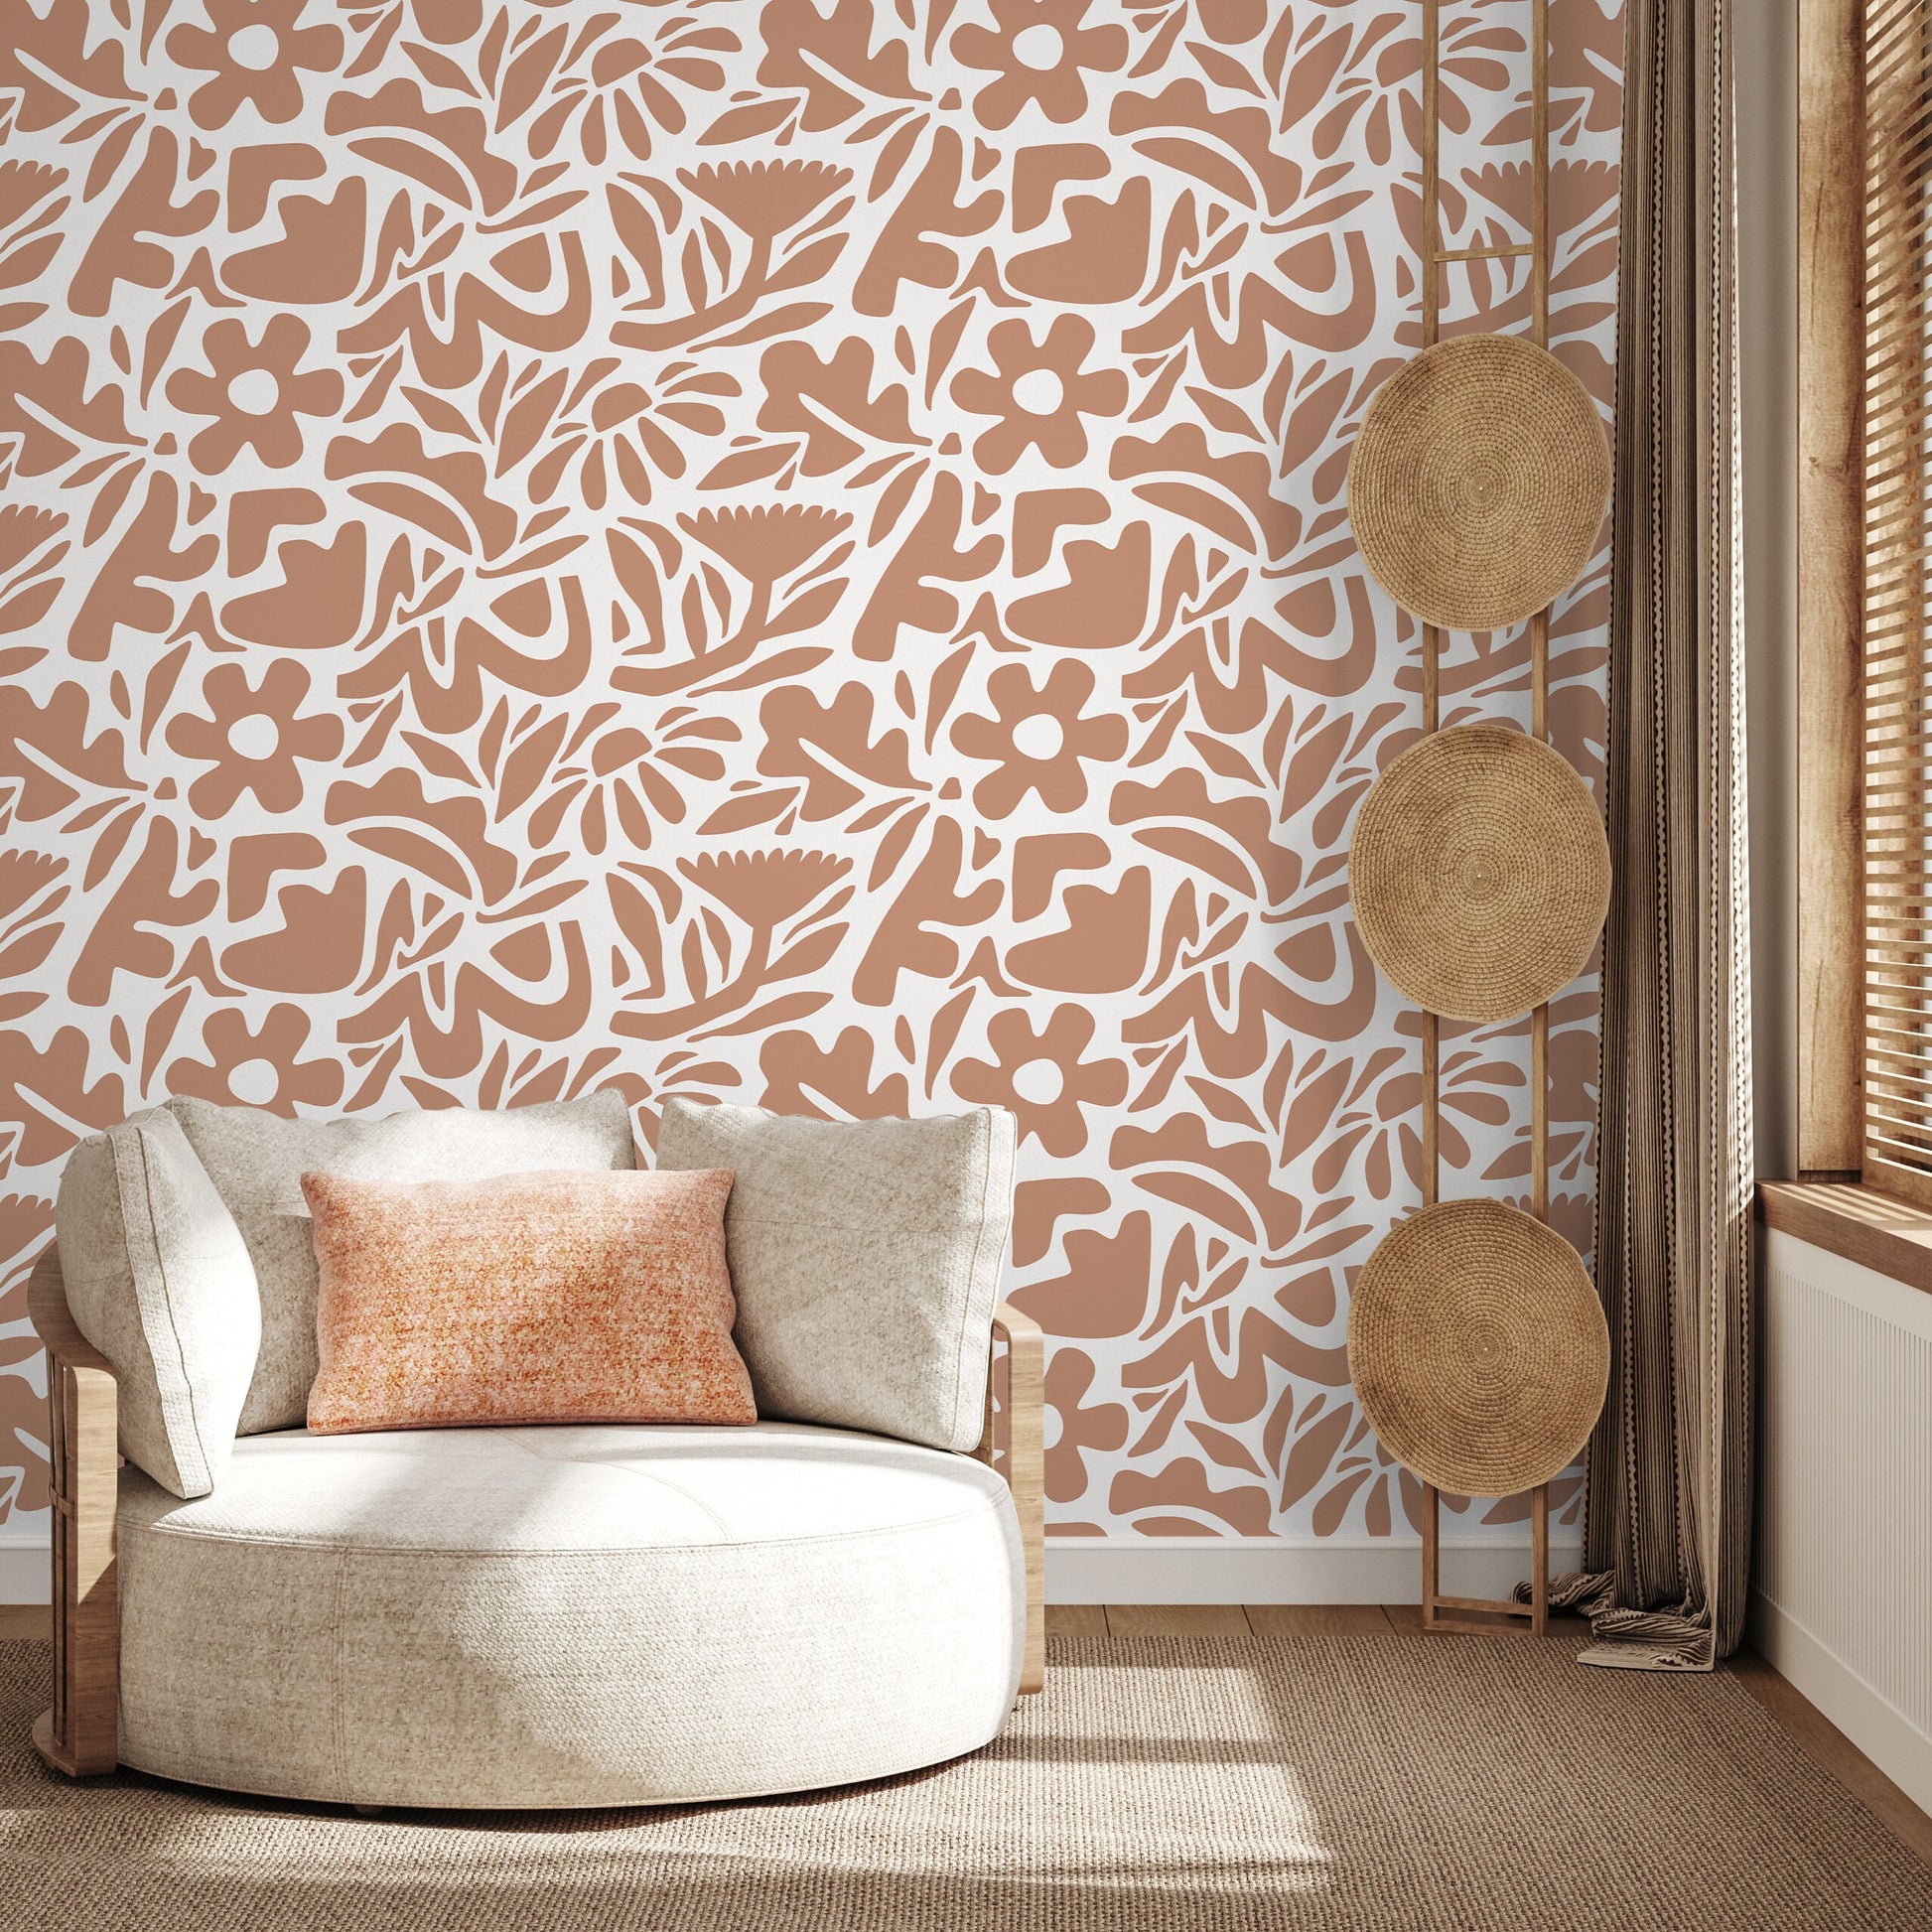 Orange Abstract Wallpaper Boho Floral Wallpaper Peel and Stick and Traditional Wallpaper - D674